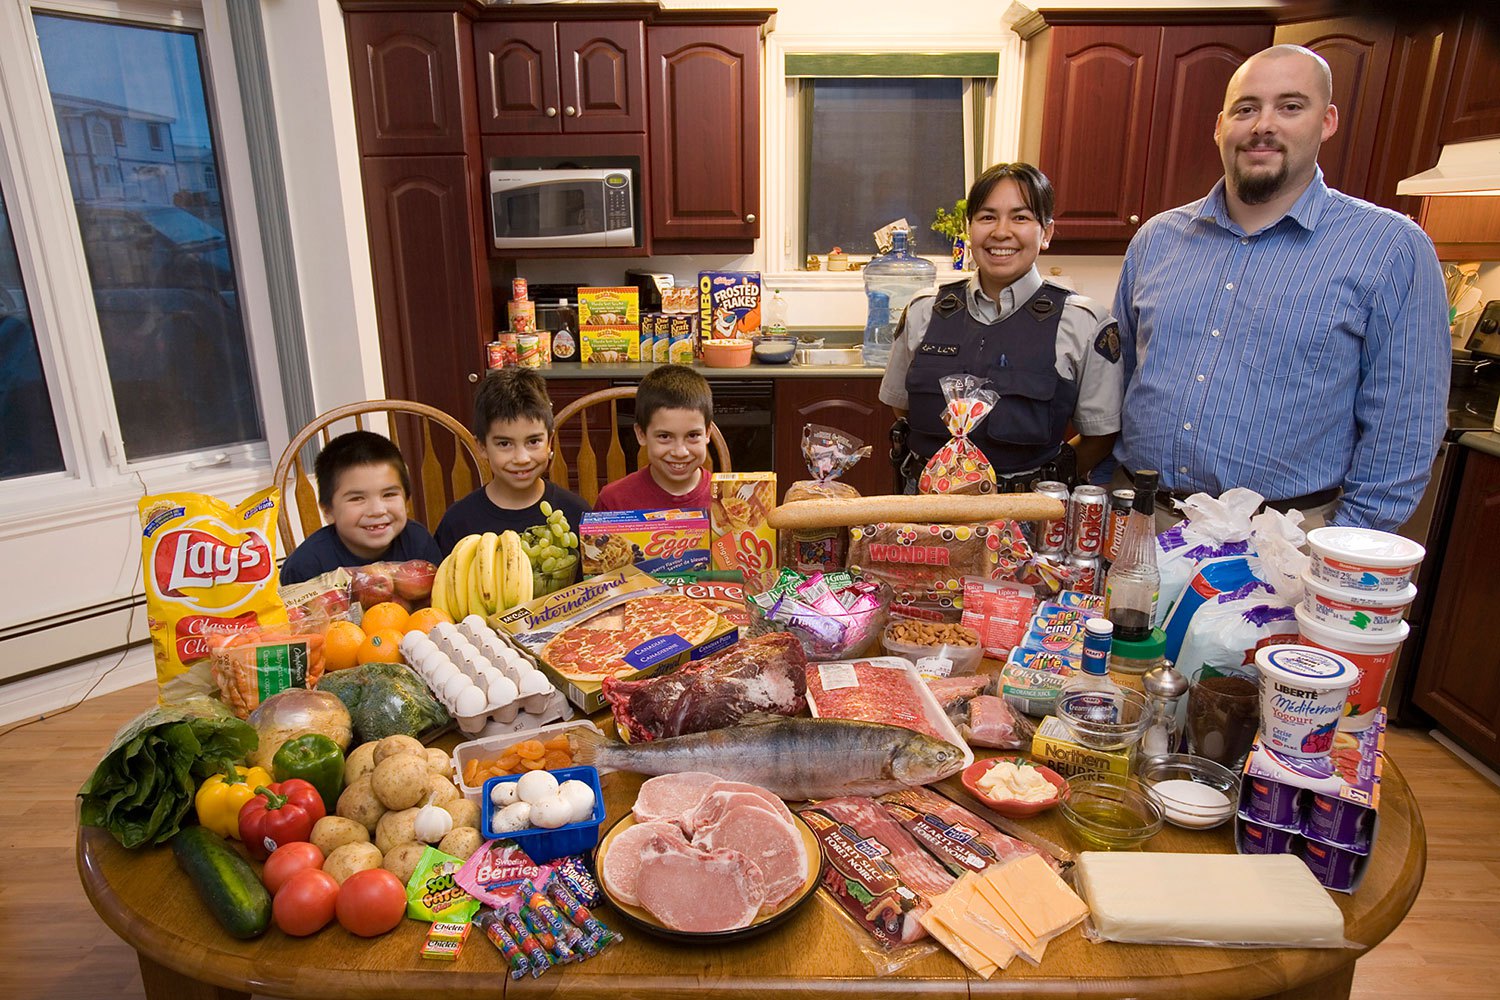 Canada: The Melansons of Iqaluit, Nunavut Territory - Food expenditure for one week: US$345. Favorite Foods: narwhal, polar bear, extra cheese stuffed crust pizza, watermelon.